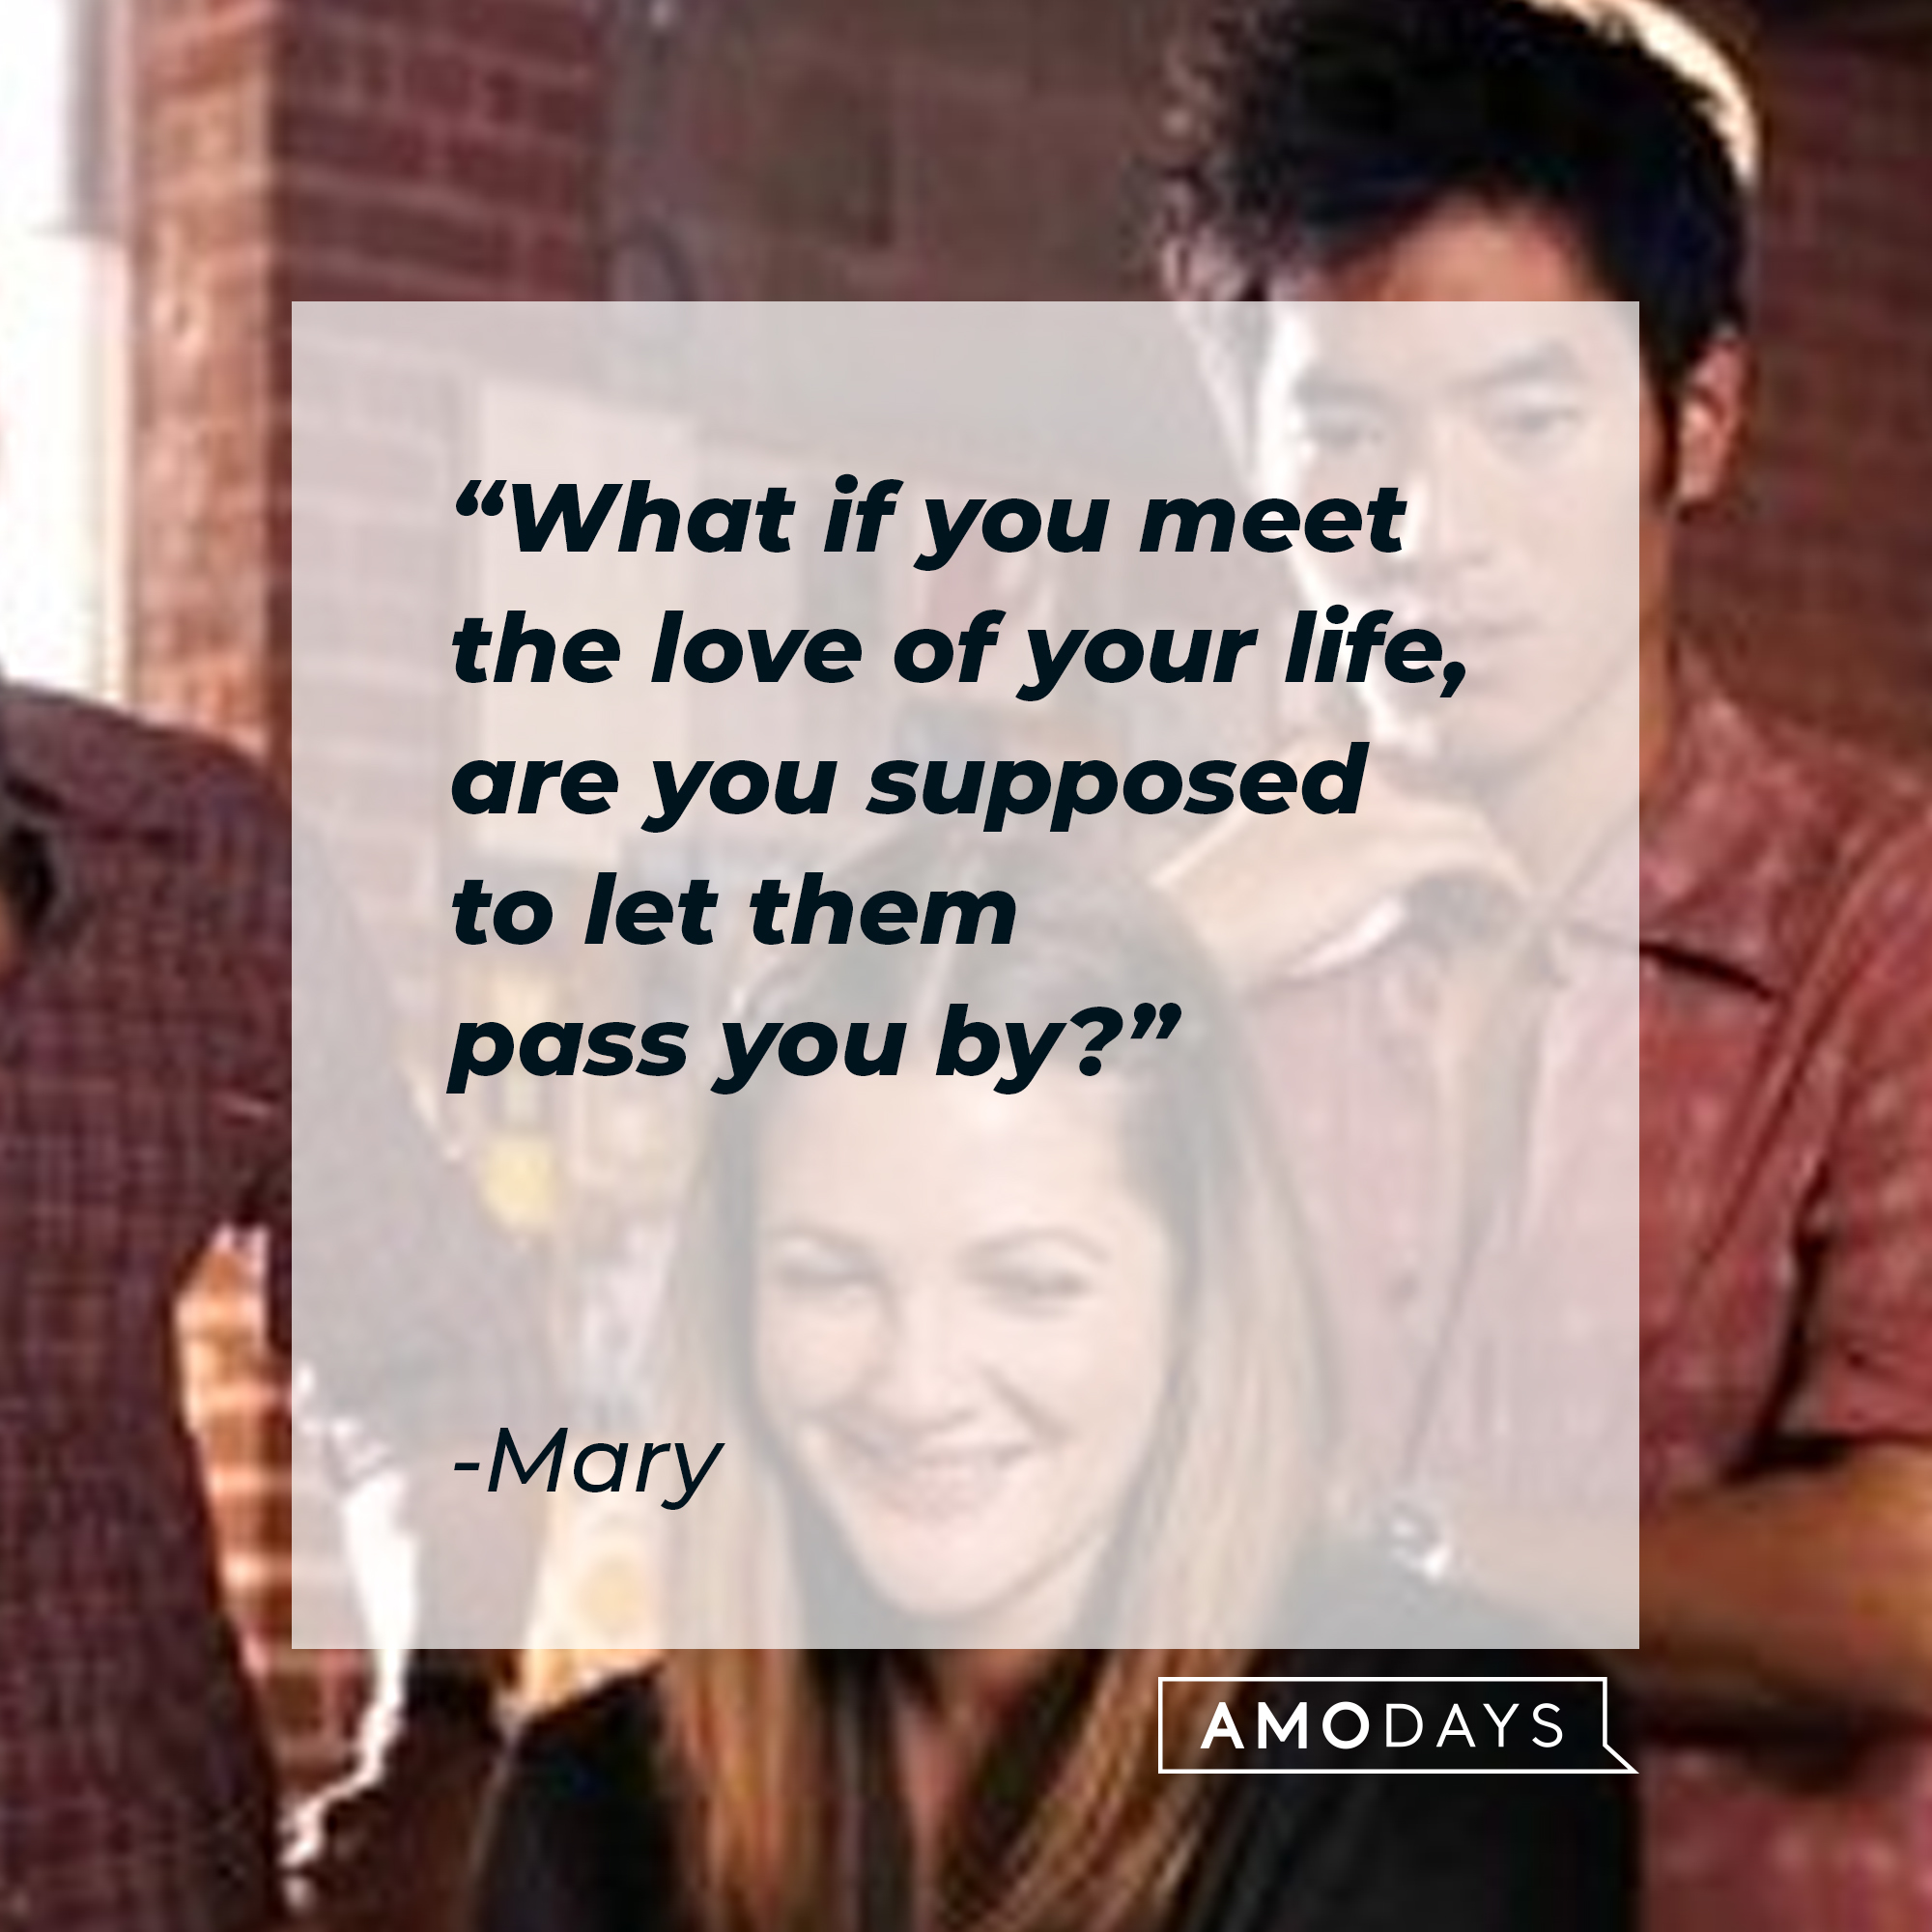 Mary's quote: "What if you meet the love of your life, are you supposed to let them pass you by?" | Source: Source: Facebook/hesjustnotthatintoyou